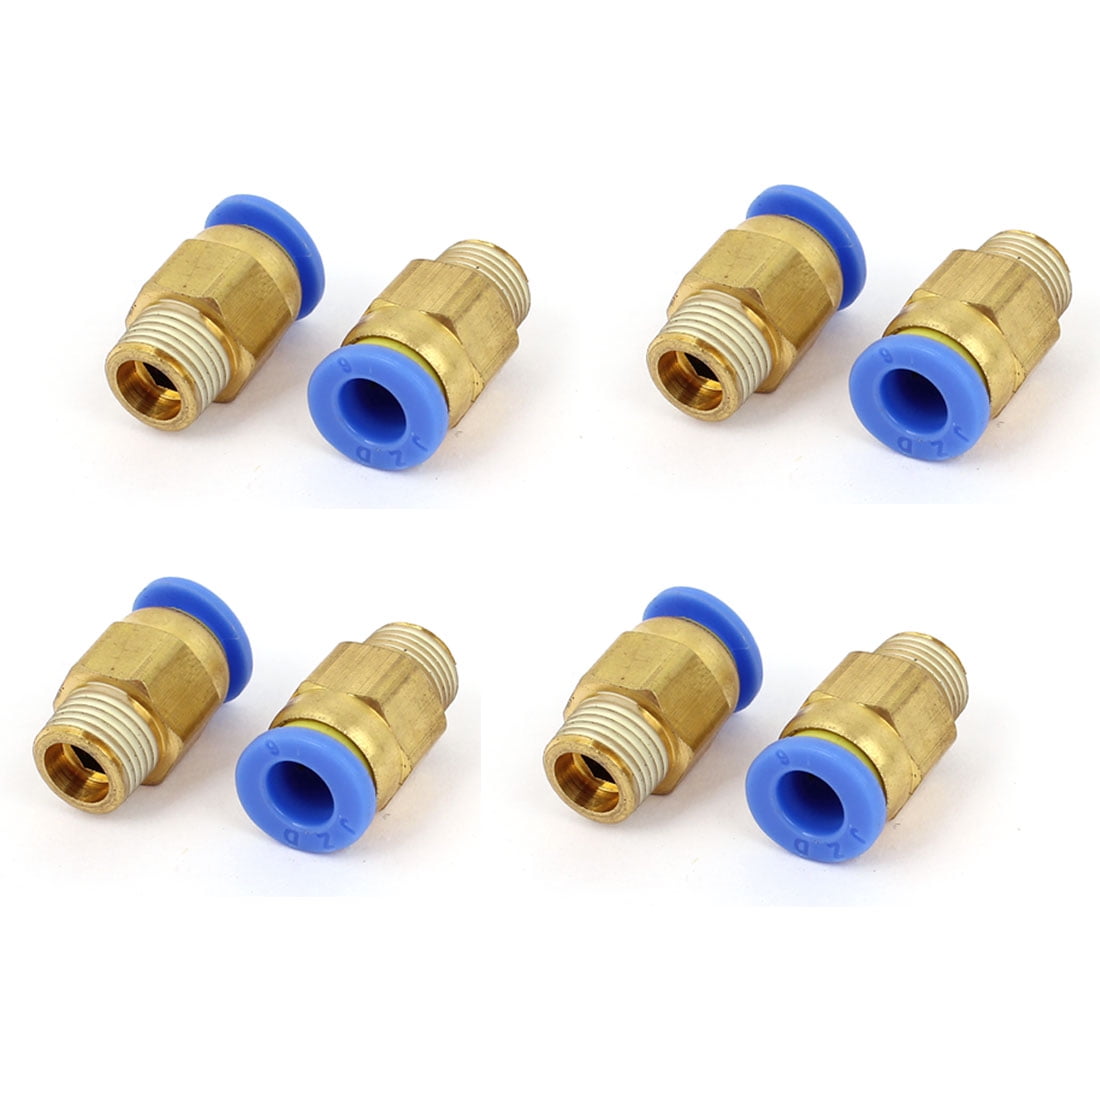 3/8BSPT Female Thread Quick Coupler Connector for 6mm OD Tube 